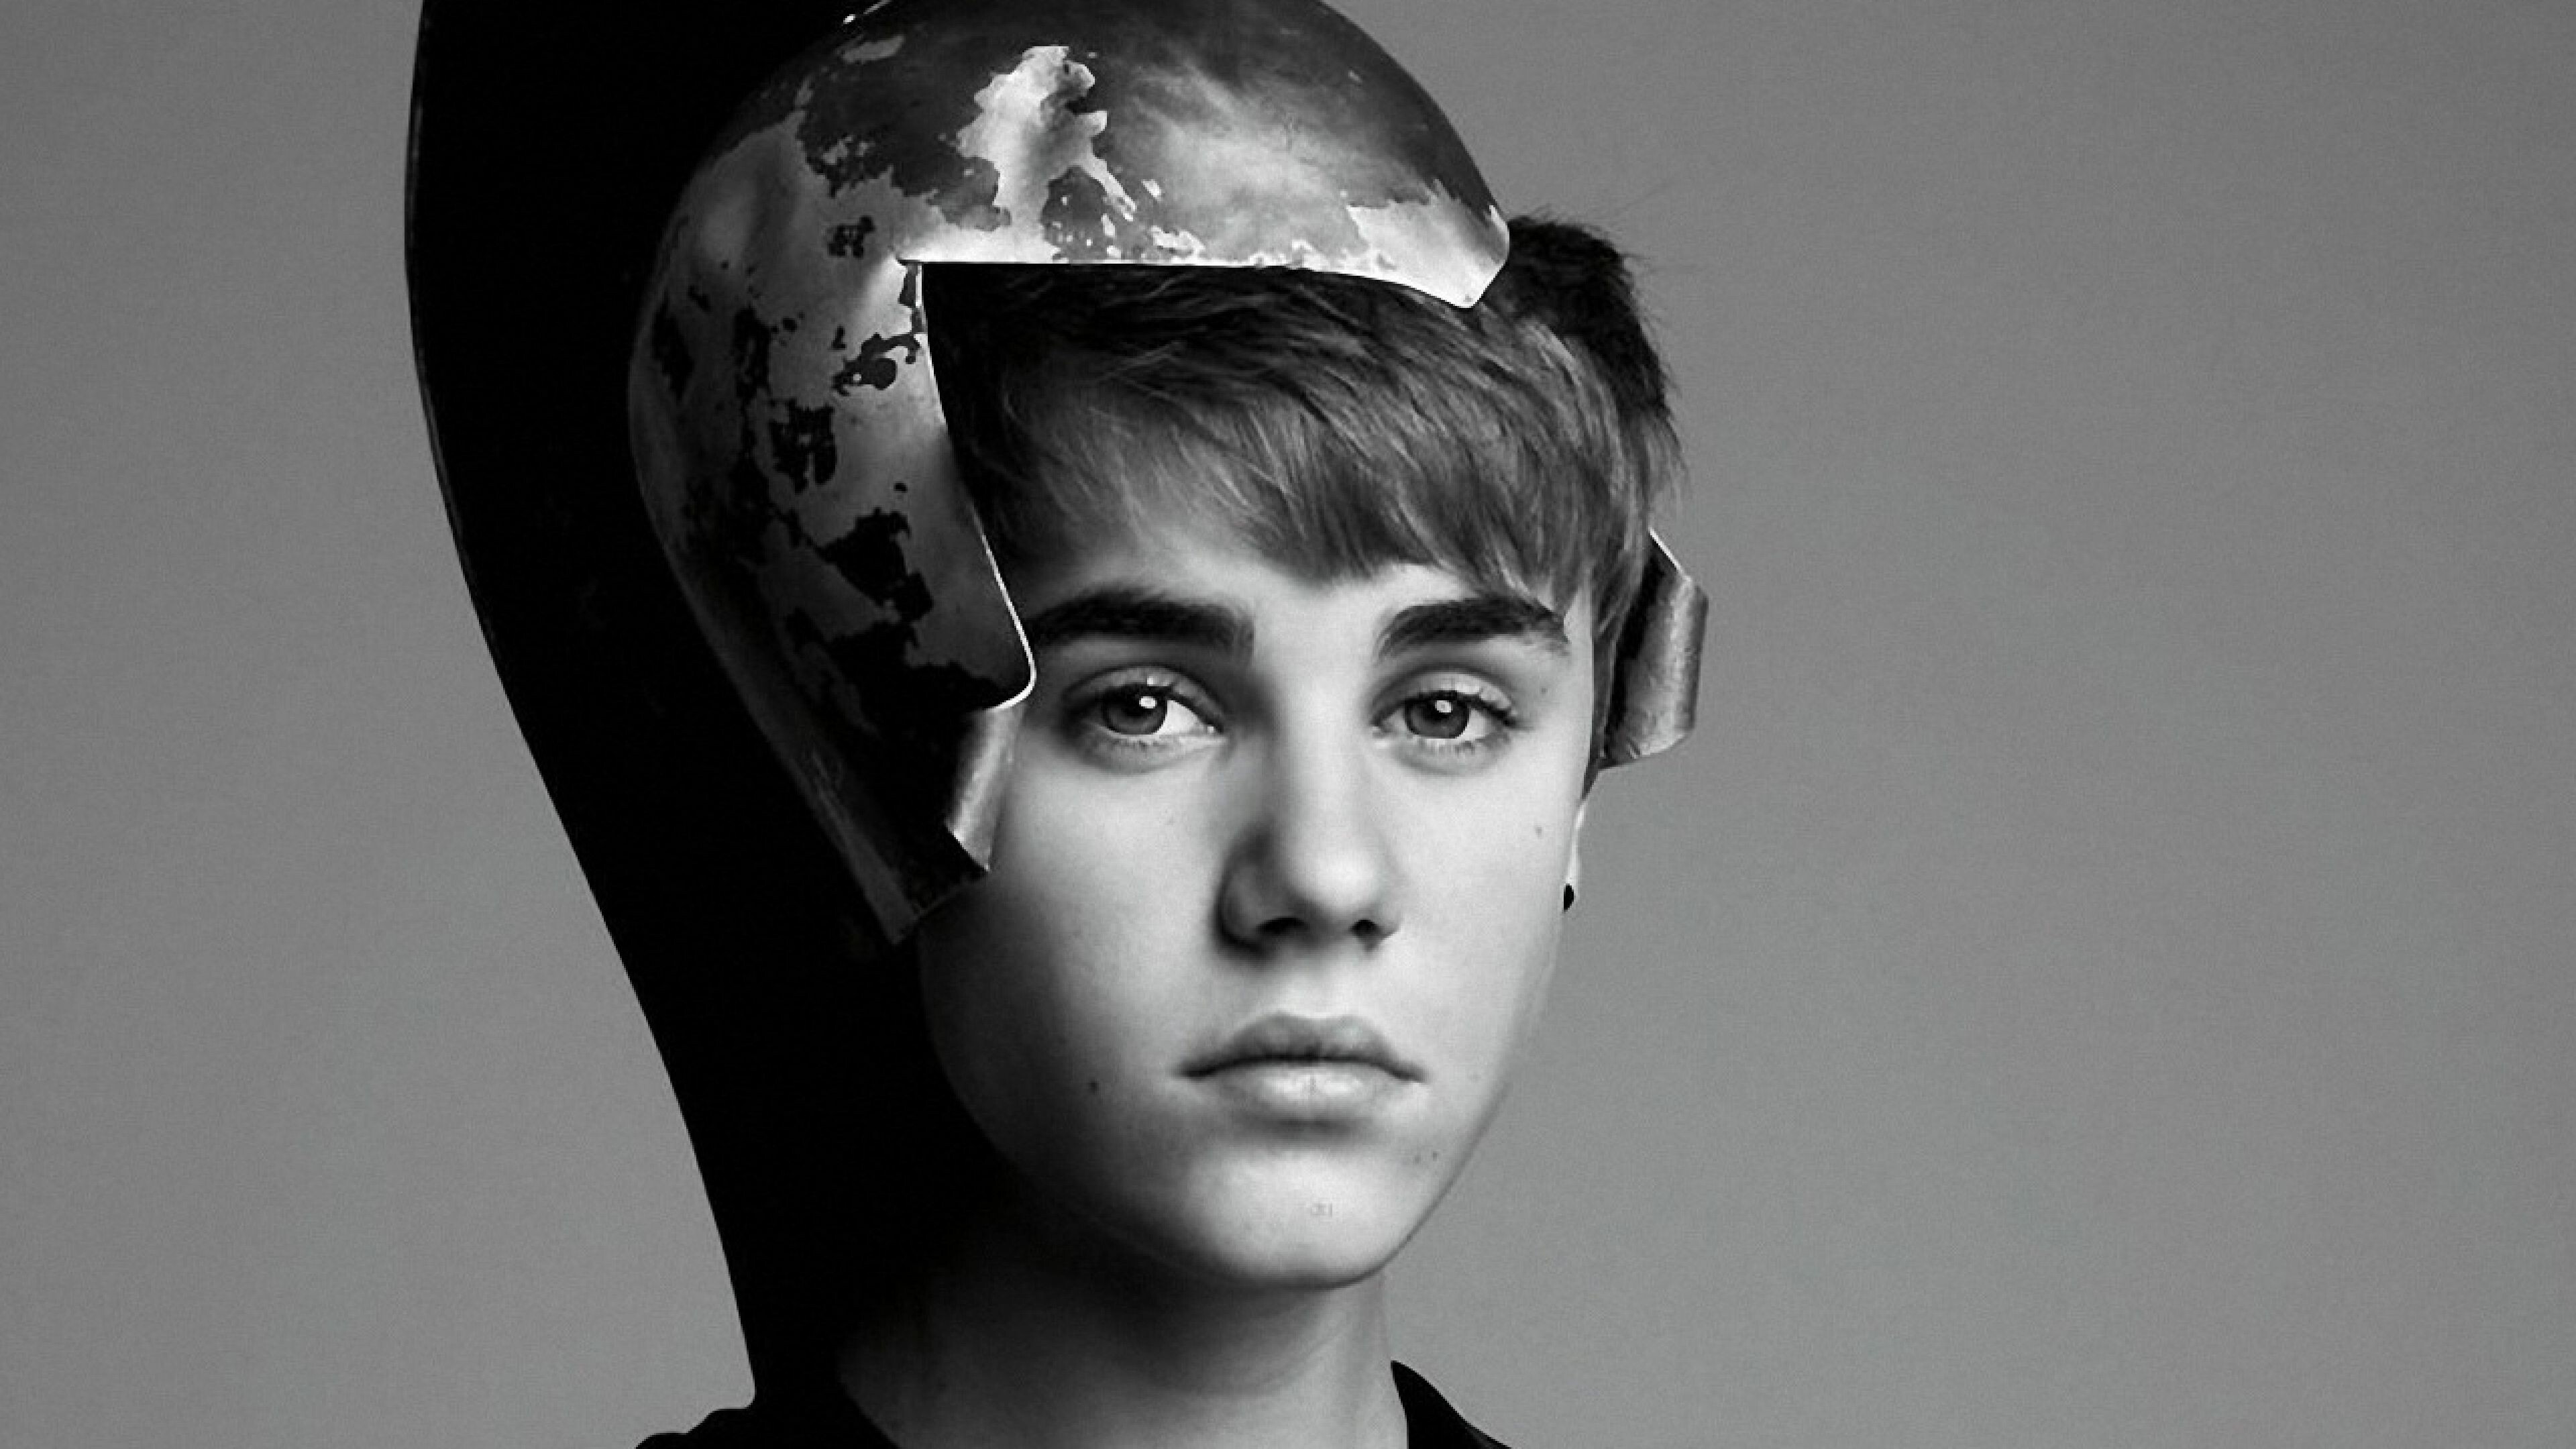 Justin Bieber: A Canadian singer, Global influence in modern-day popular music. 3840x2160 4K Background.